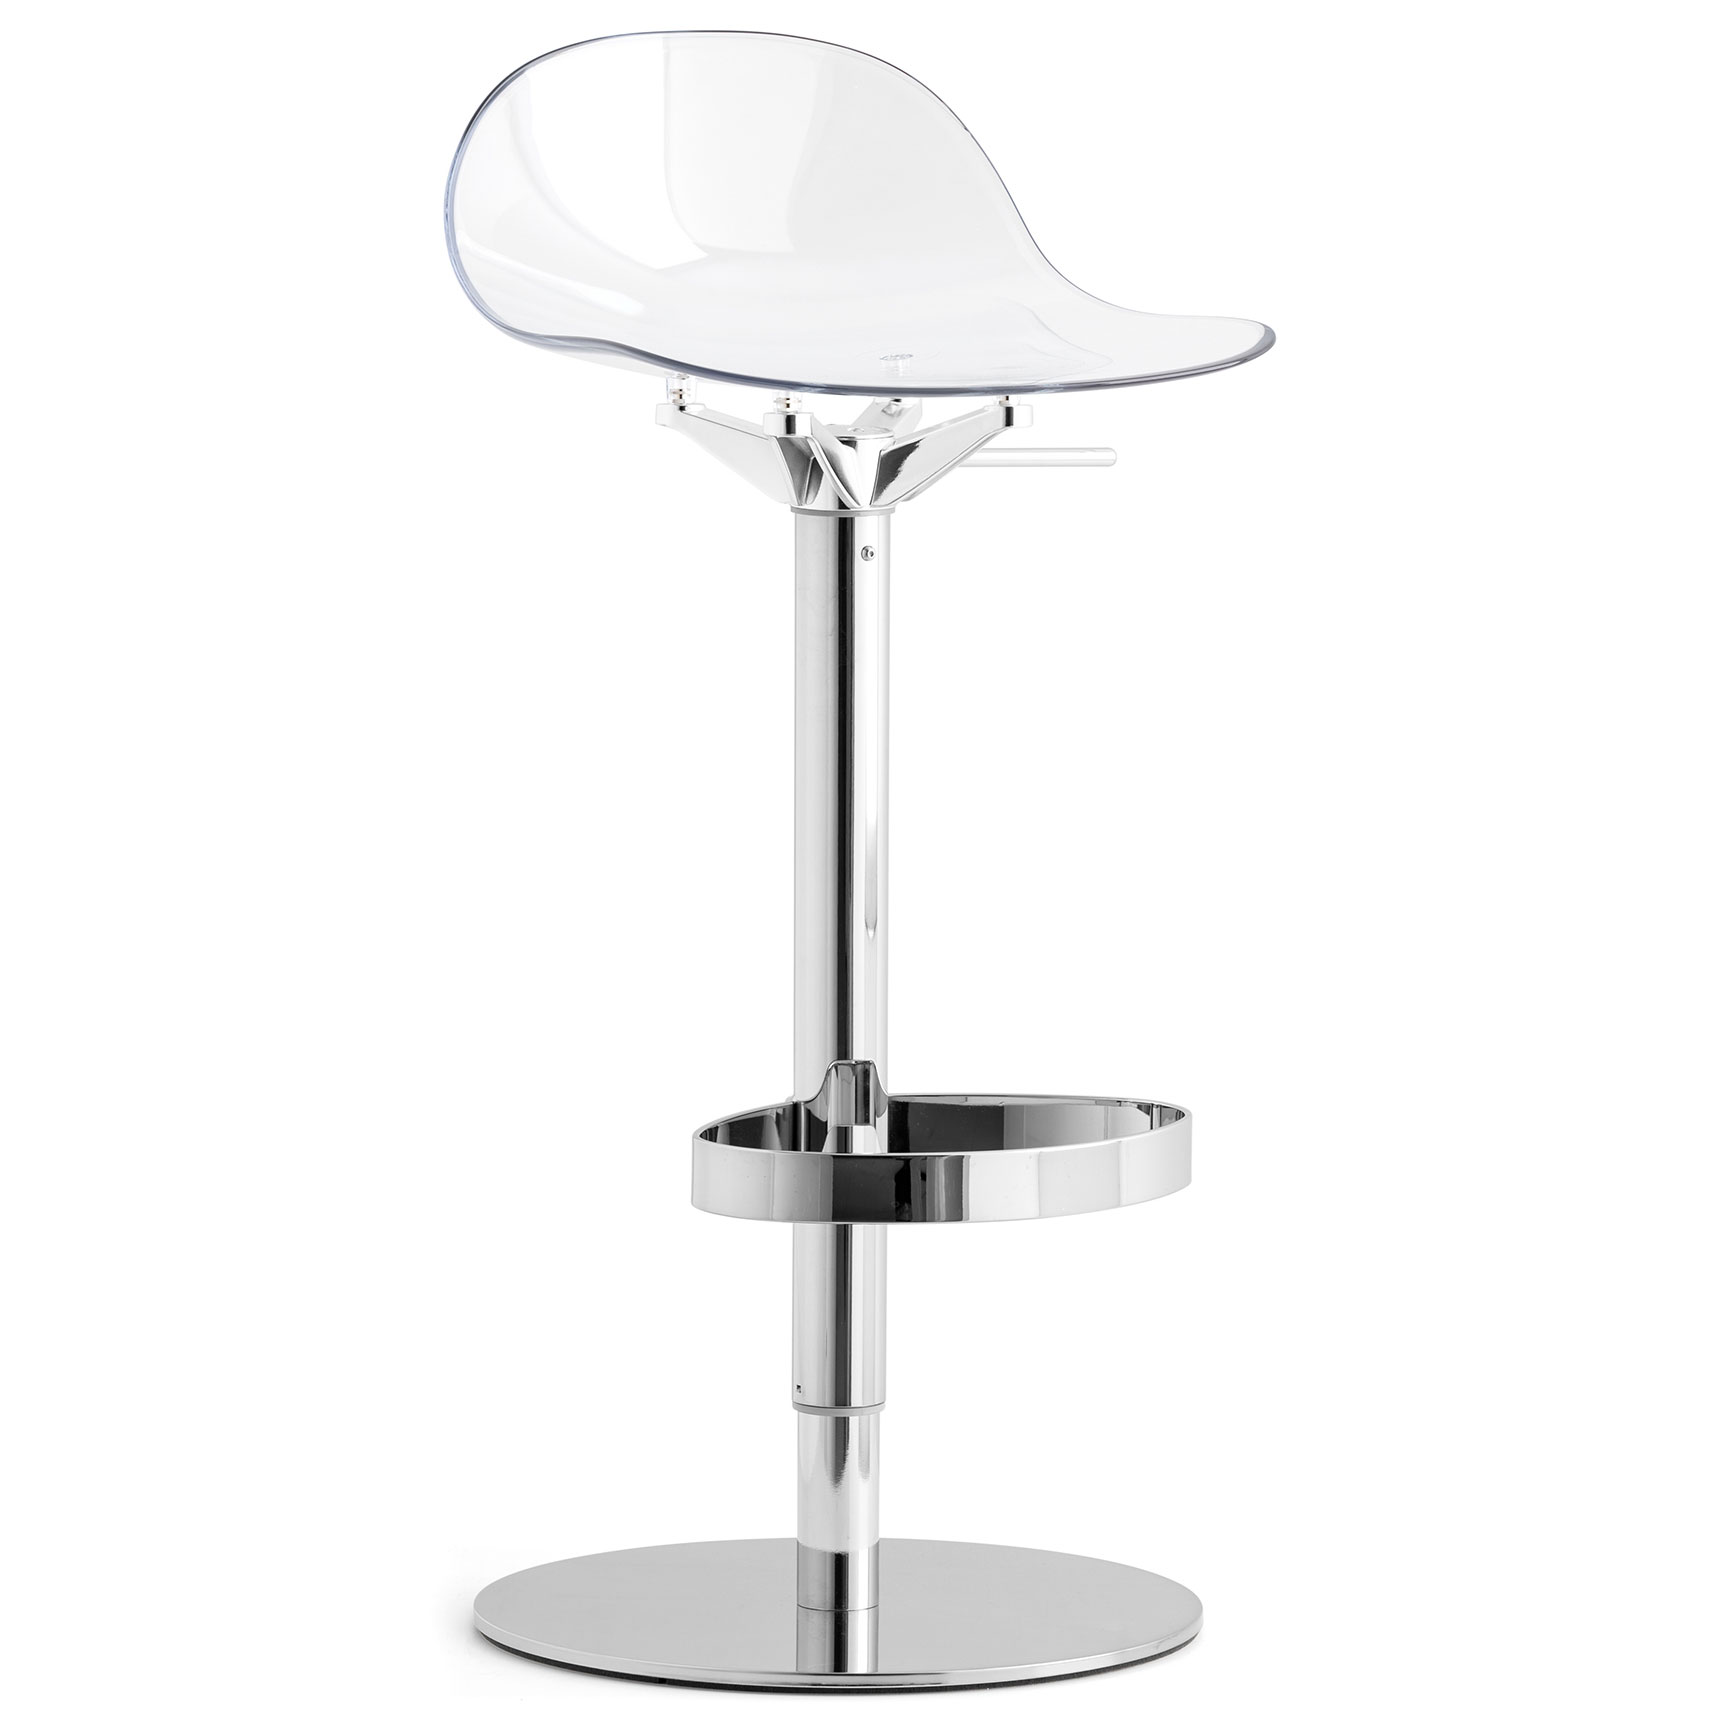 Academy Adjustable Transparent Bar Stool by Connubia |  CB216900007784800000000 | CON1185169